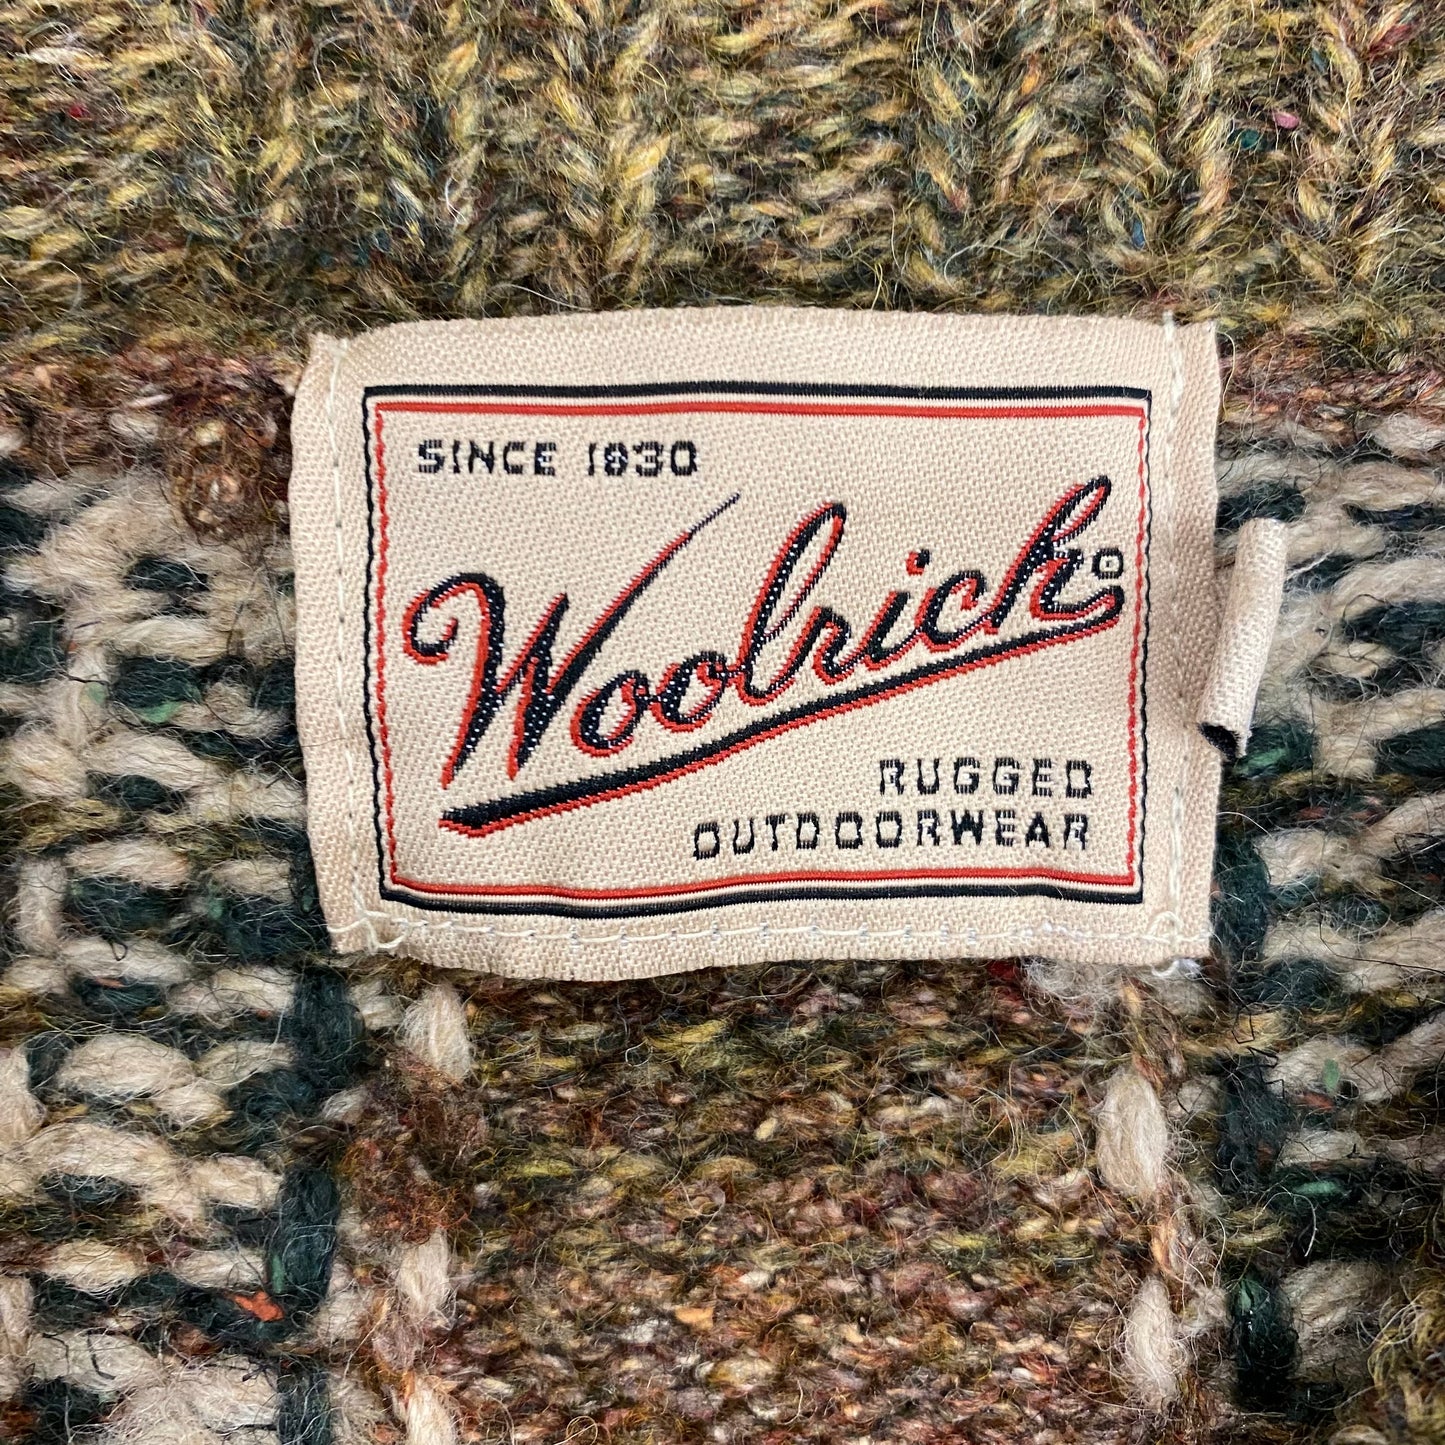 Woolrich Handknit Plaid Button Up Sweater - Size Large